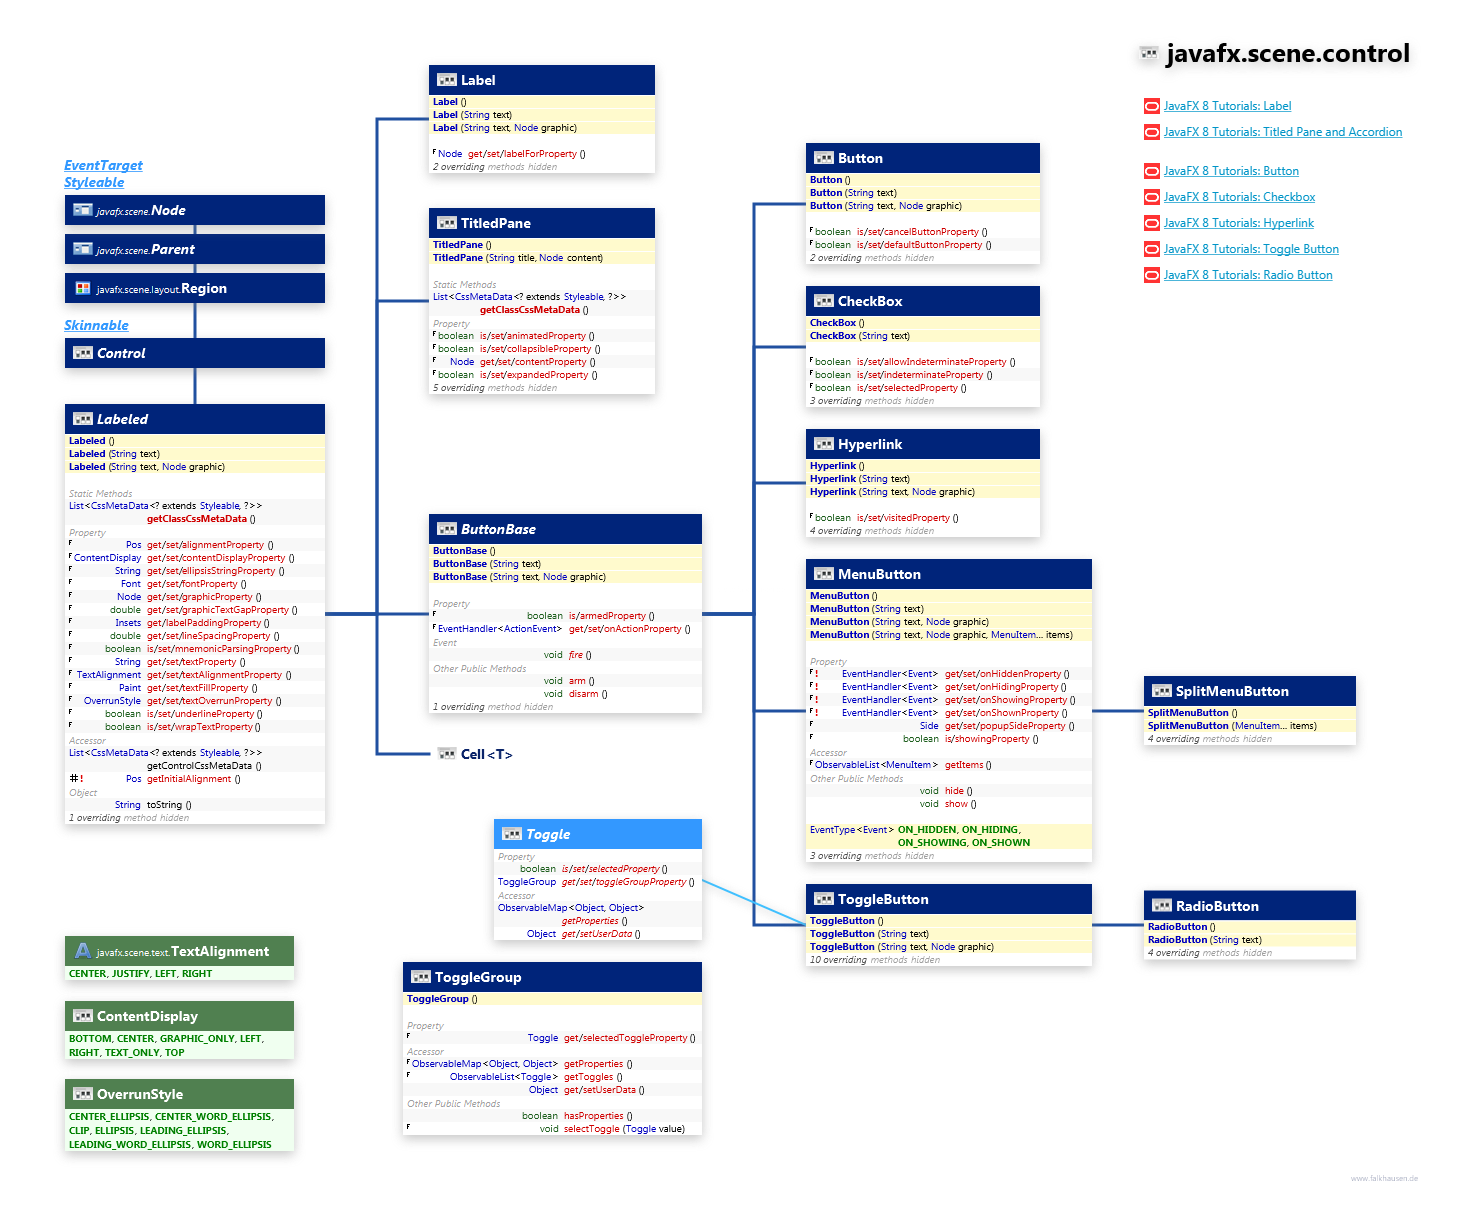 javafx.scene.control Labeled class diagram and api documentation for JavaFX 10